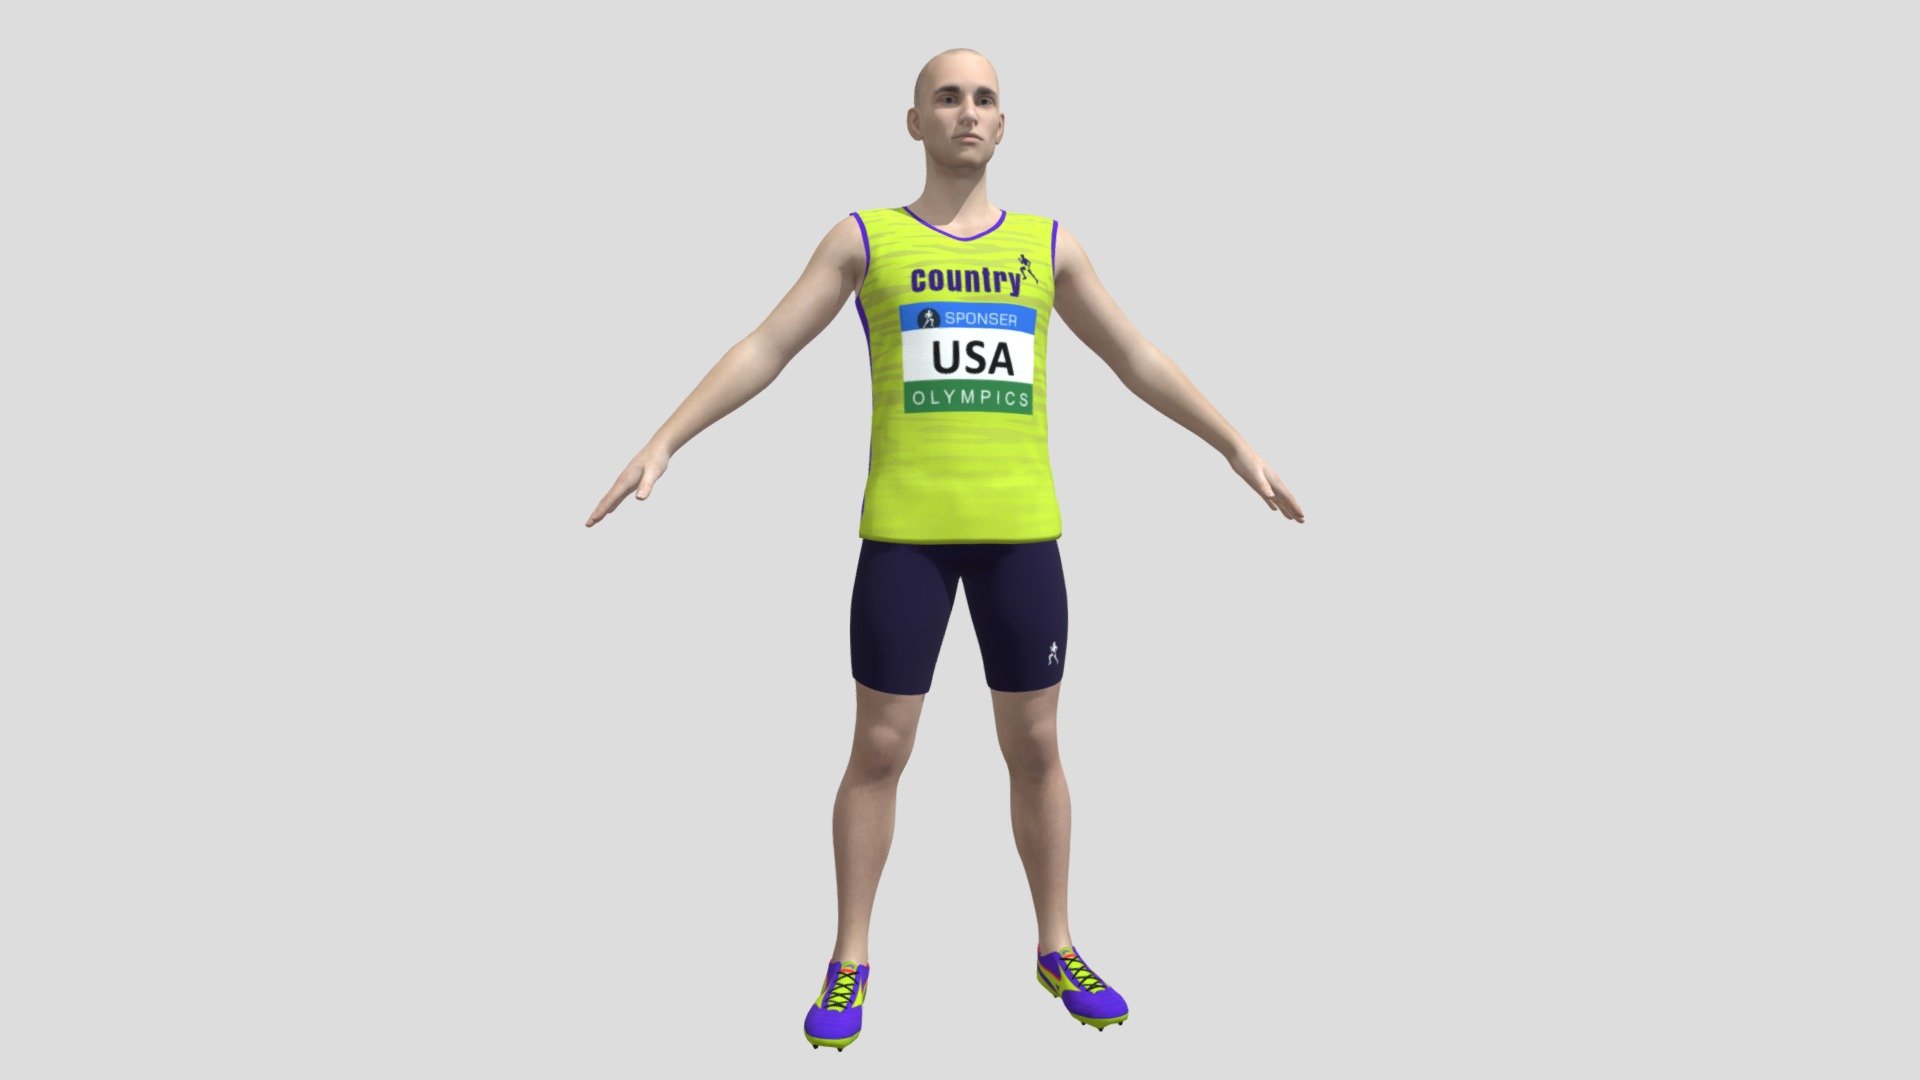 Athletic Runner 3D model is a high quality, photo real model that will enhance detail and realism to any of your game projects or commercials. The model has a fully textured, detailed design that allows for close-up renders.

• High quality polygonal model with detailed texture, correctly scaled for an accurate representation of the original object.
• Maya 2019 V-Ray and standard materials scenes
• All colours can be easily modified using Photoshop
• Model is fully textured with all materials applied.
• All textures and materials are included and mapped in every format.
• Maya models are separated for easy selection, and objects are logically named for ease of scene management.
• No cleaning up necessary, just drop your models into the scene
• No special plugin needed to open scene.
• Character and Cloth Textures 4096 x 4096 - Athlete Runner - Buy Royalty Free 3D model by trish.j2109 3d model